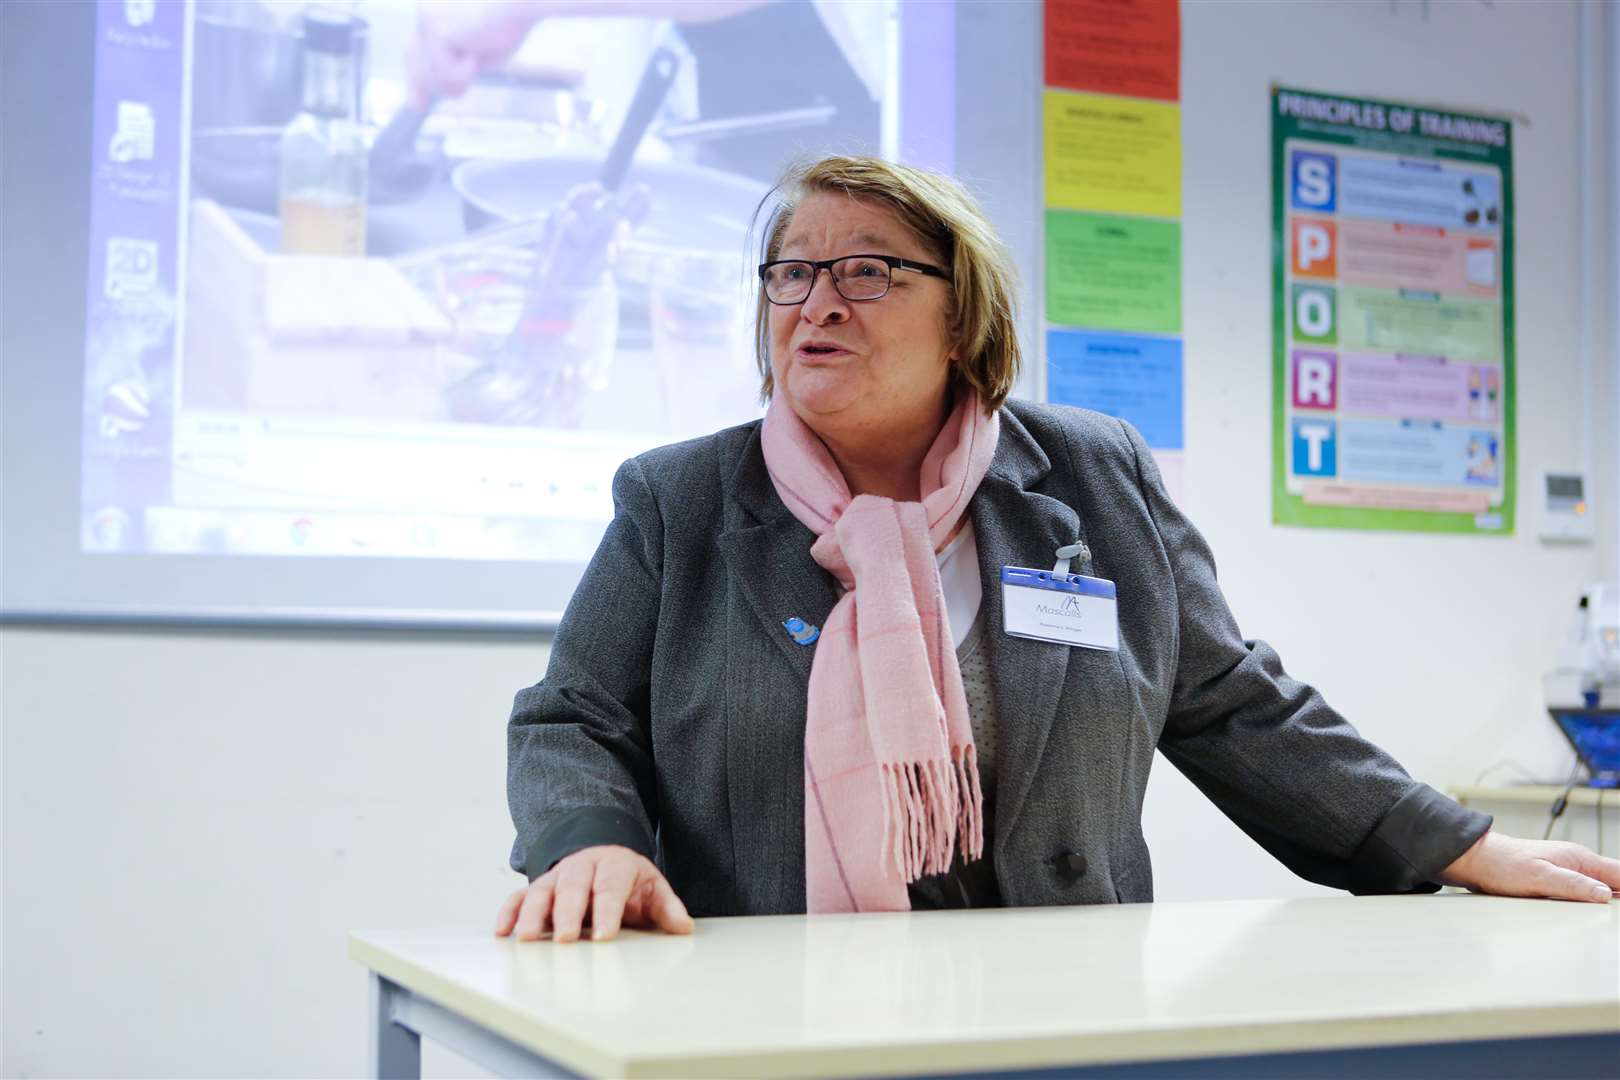 Celebrity Chef Rosemary Shrager at Mascalls School, Paddock Wood, giving a talk. Picture: Matthew Walker